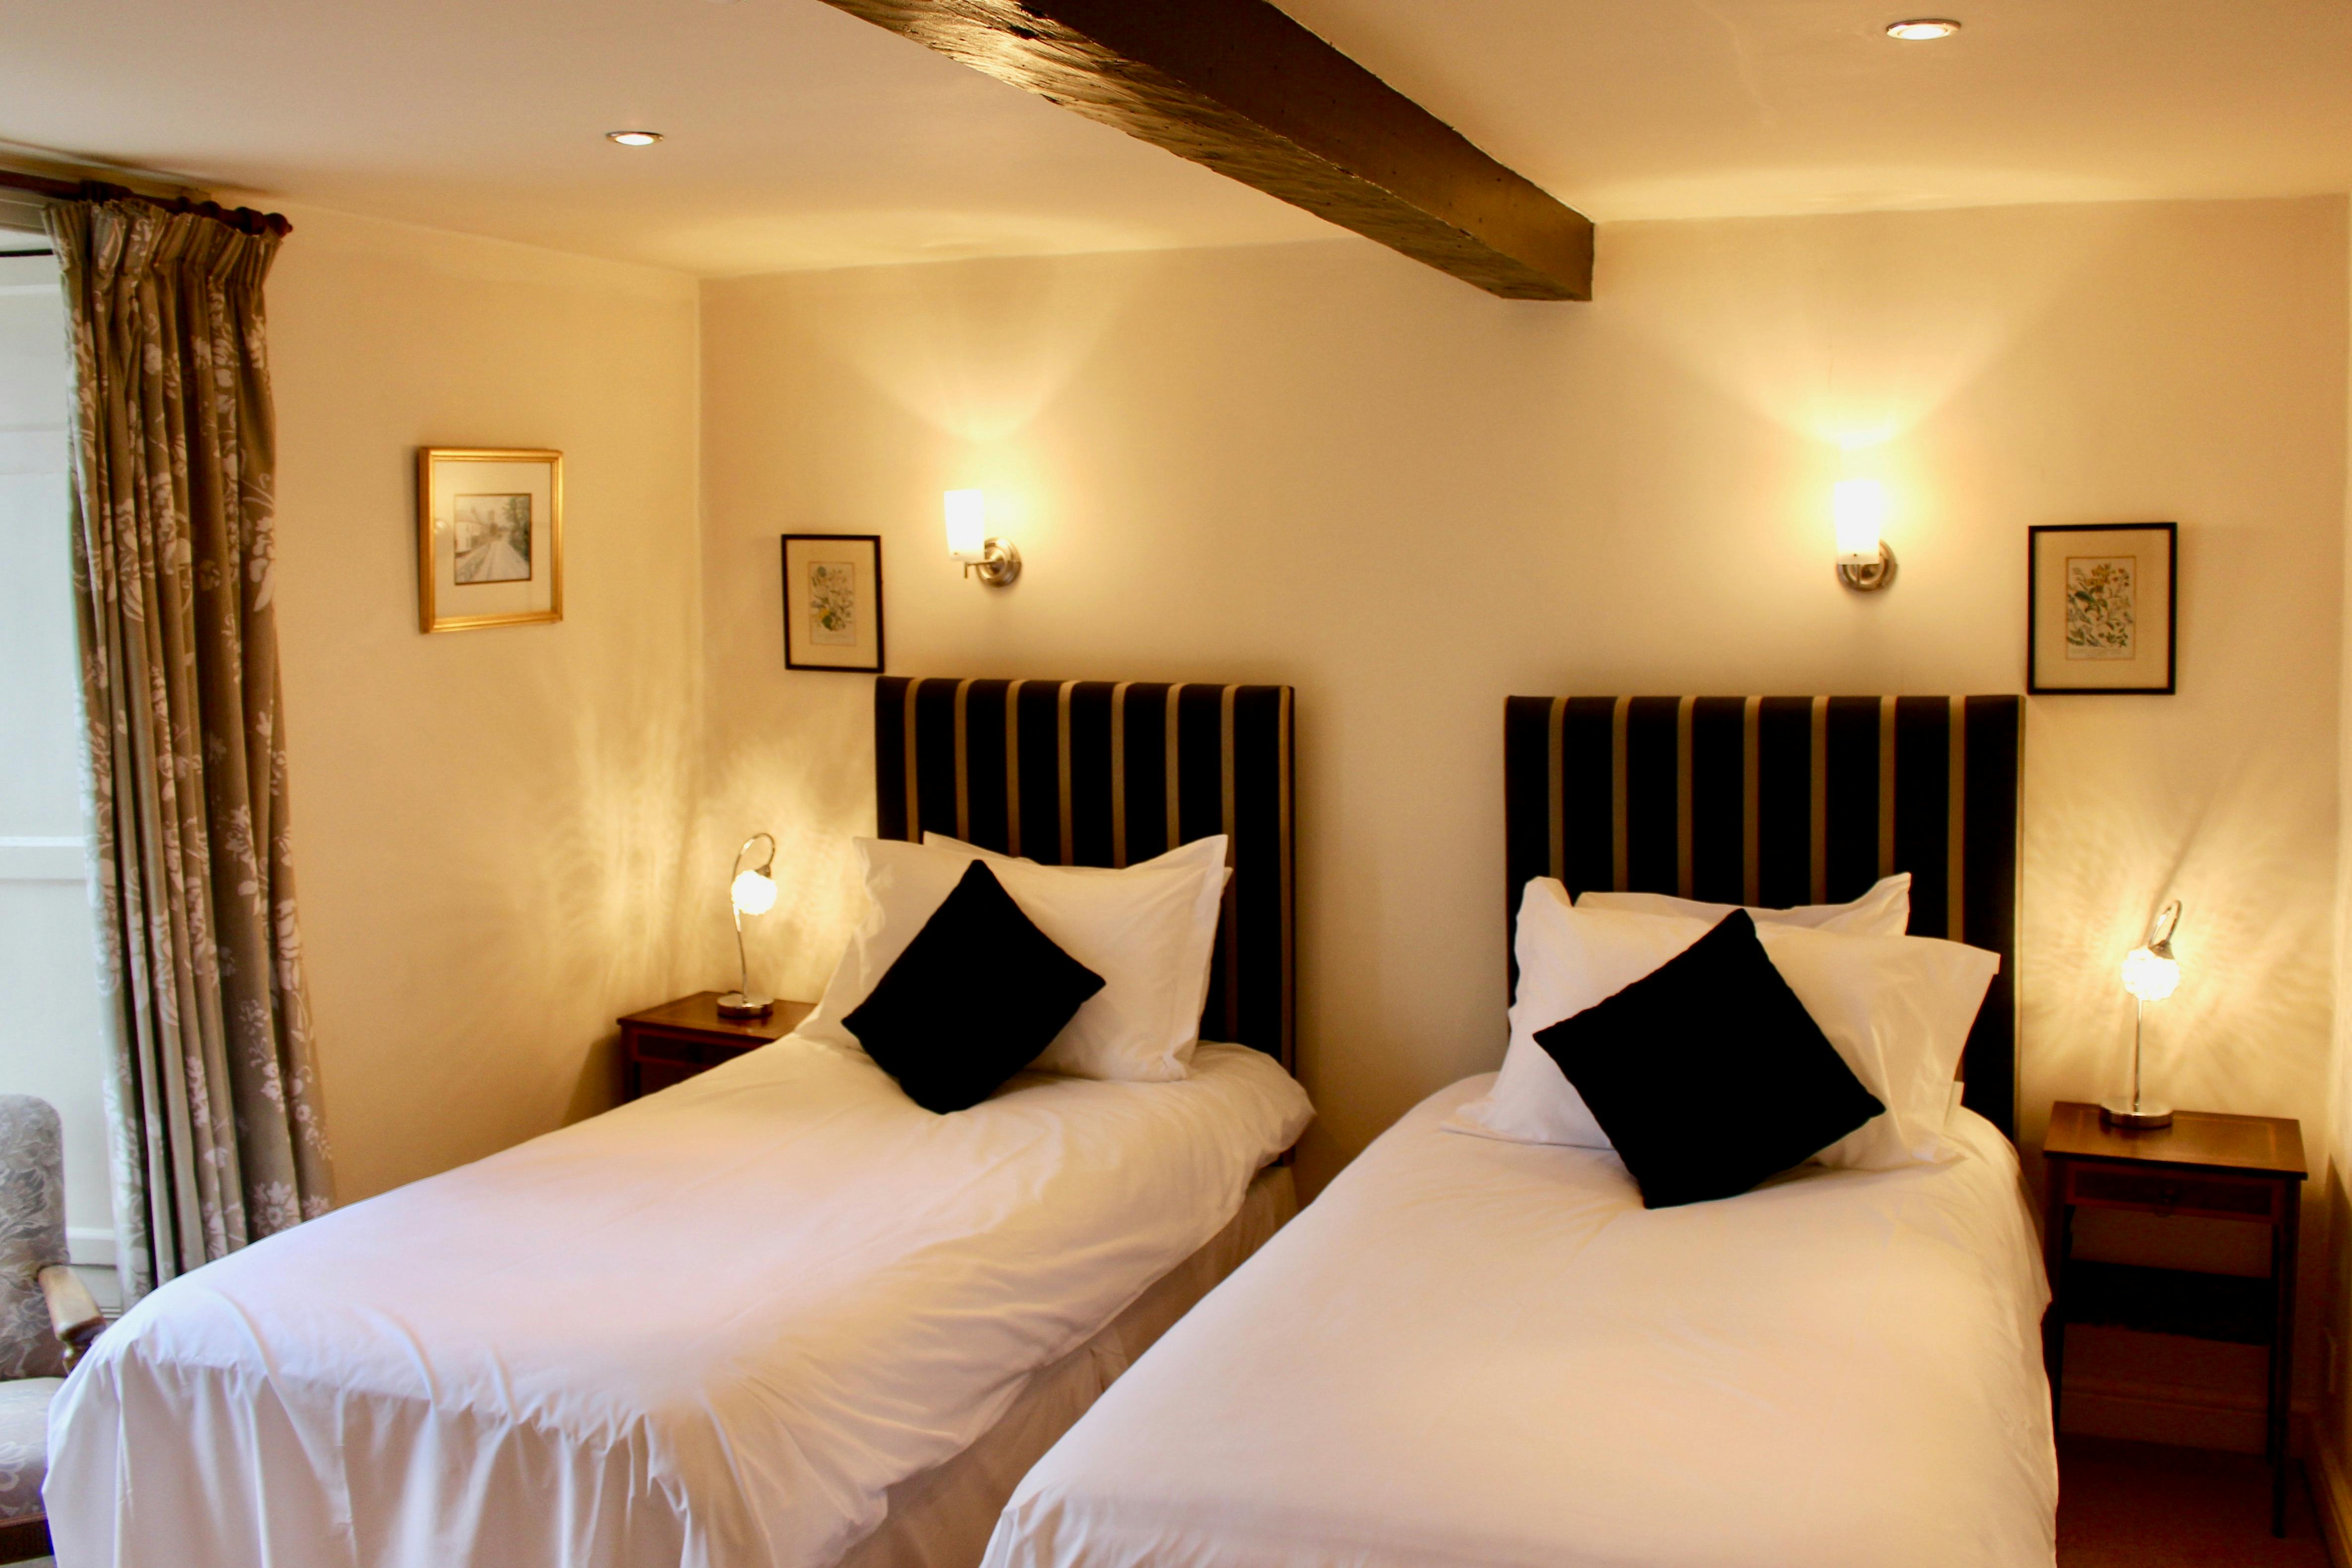 Twin bedroom at The Wensleydale Hotel, Middleham, offers boutique accommodation in the heart of the Yorkshire Dales